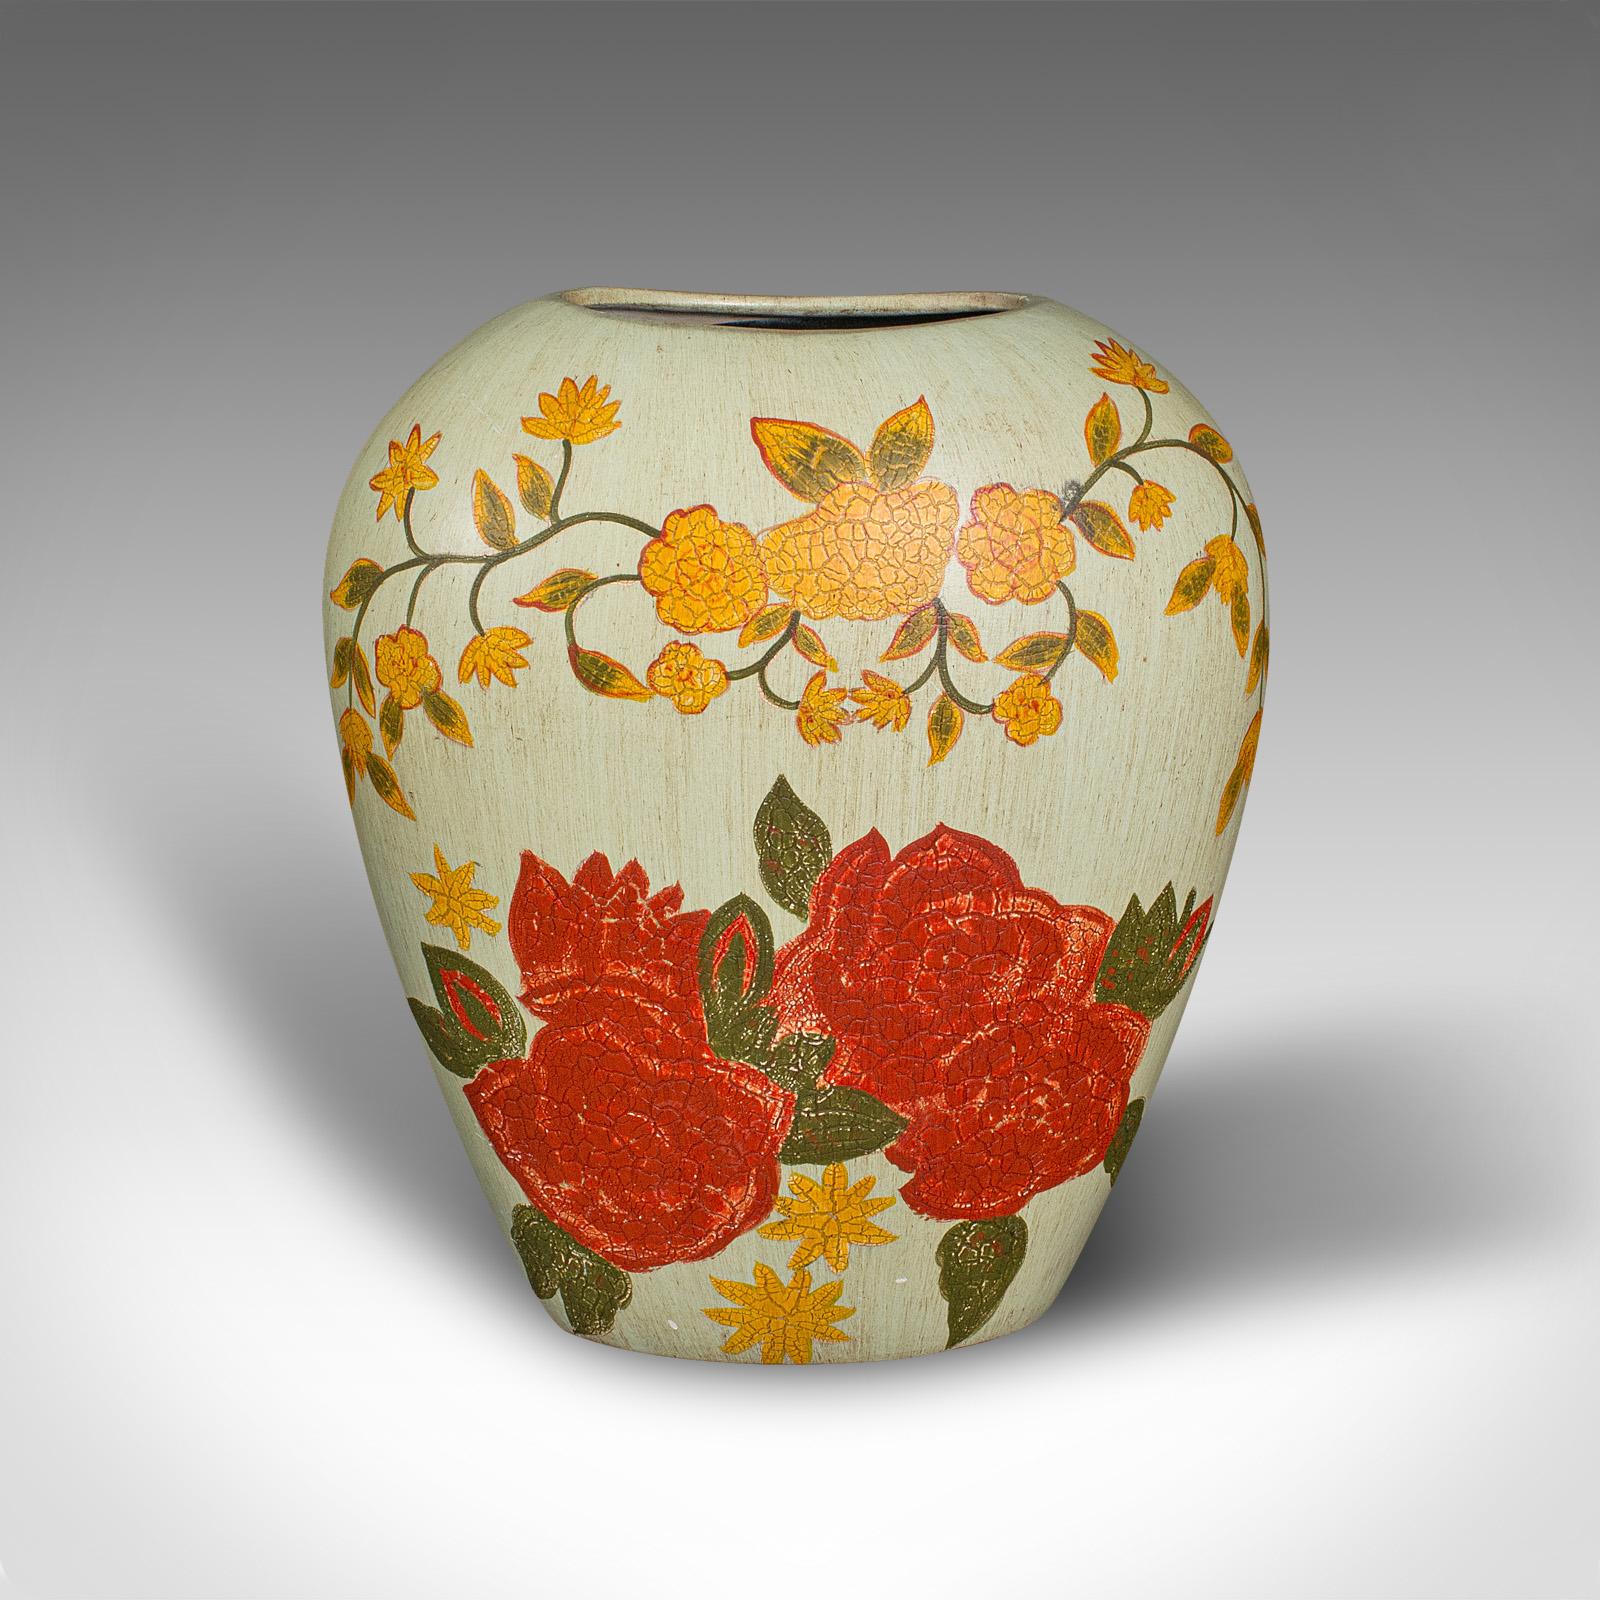 This is a vintage oval flower vase. A Spanish, hand-painted ceramic planter, dating to the mid 20th century, circa 1960.

Charmingly vibrant with a delightful hand-painted appeal
Displays a desirable aged patina and in good order
Oval bulb form with